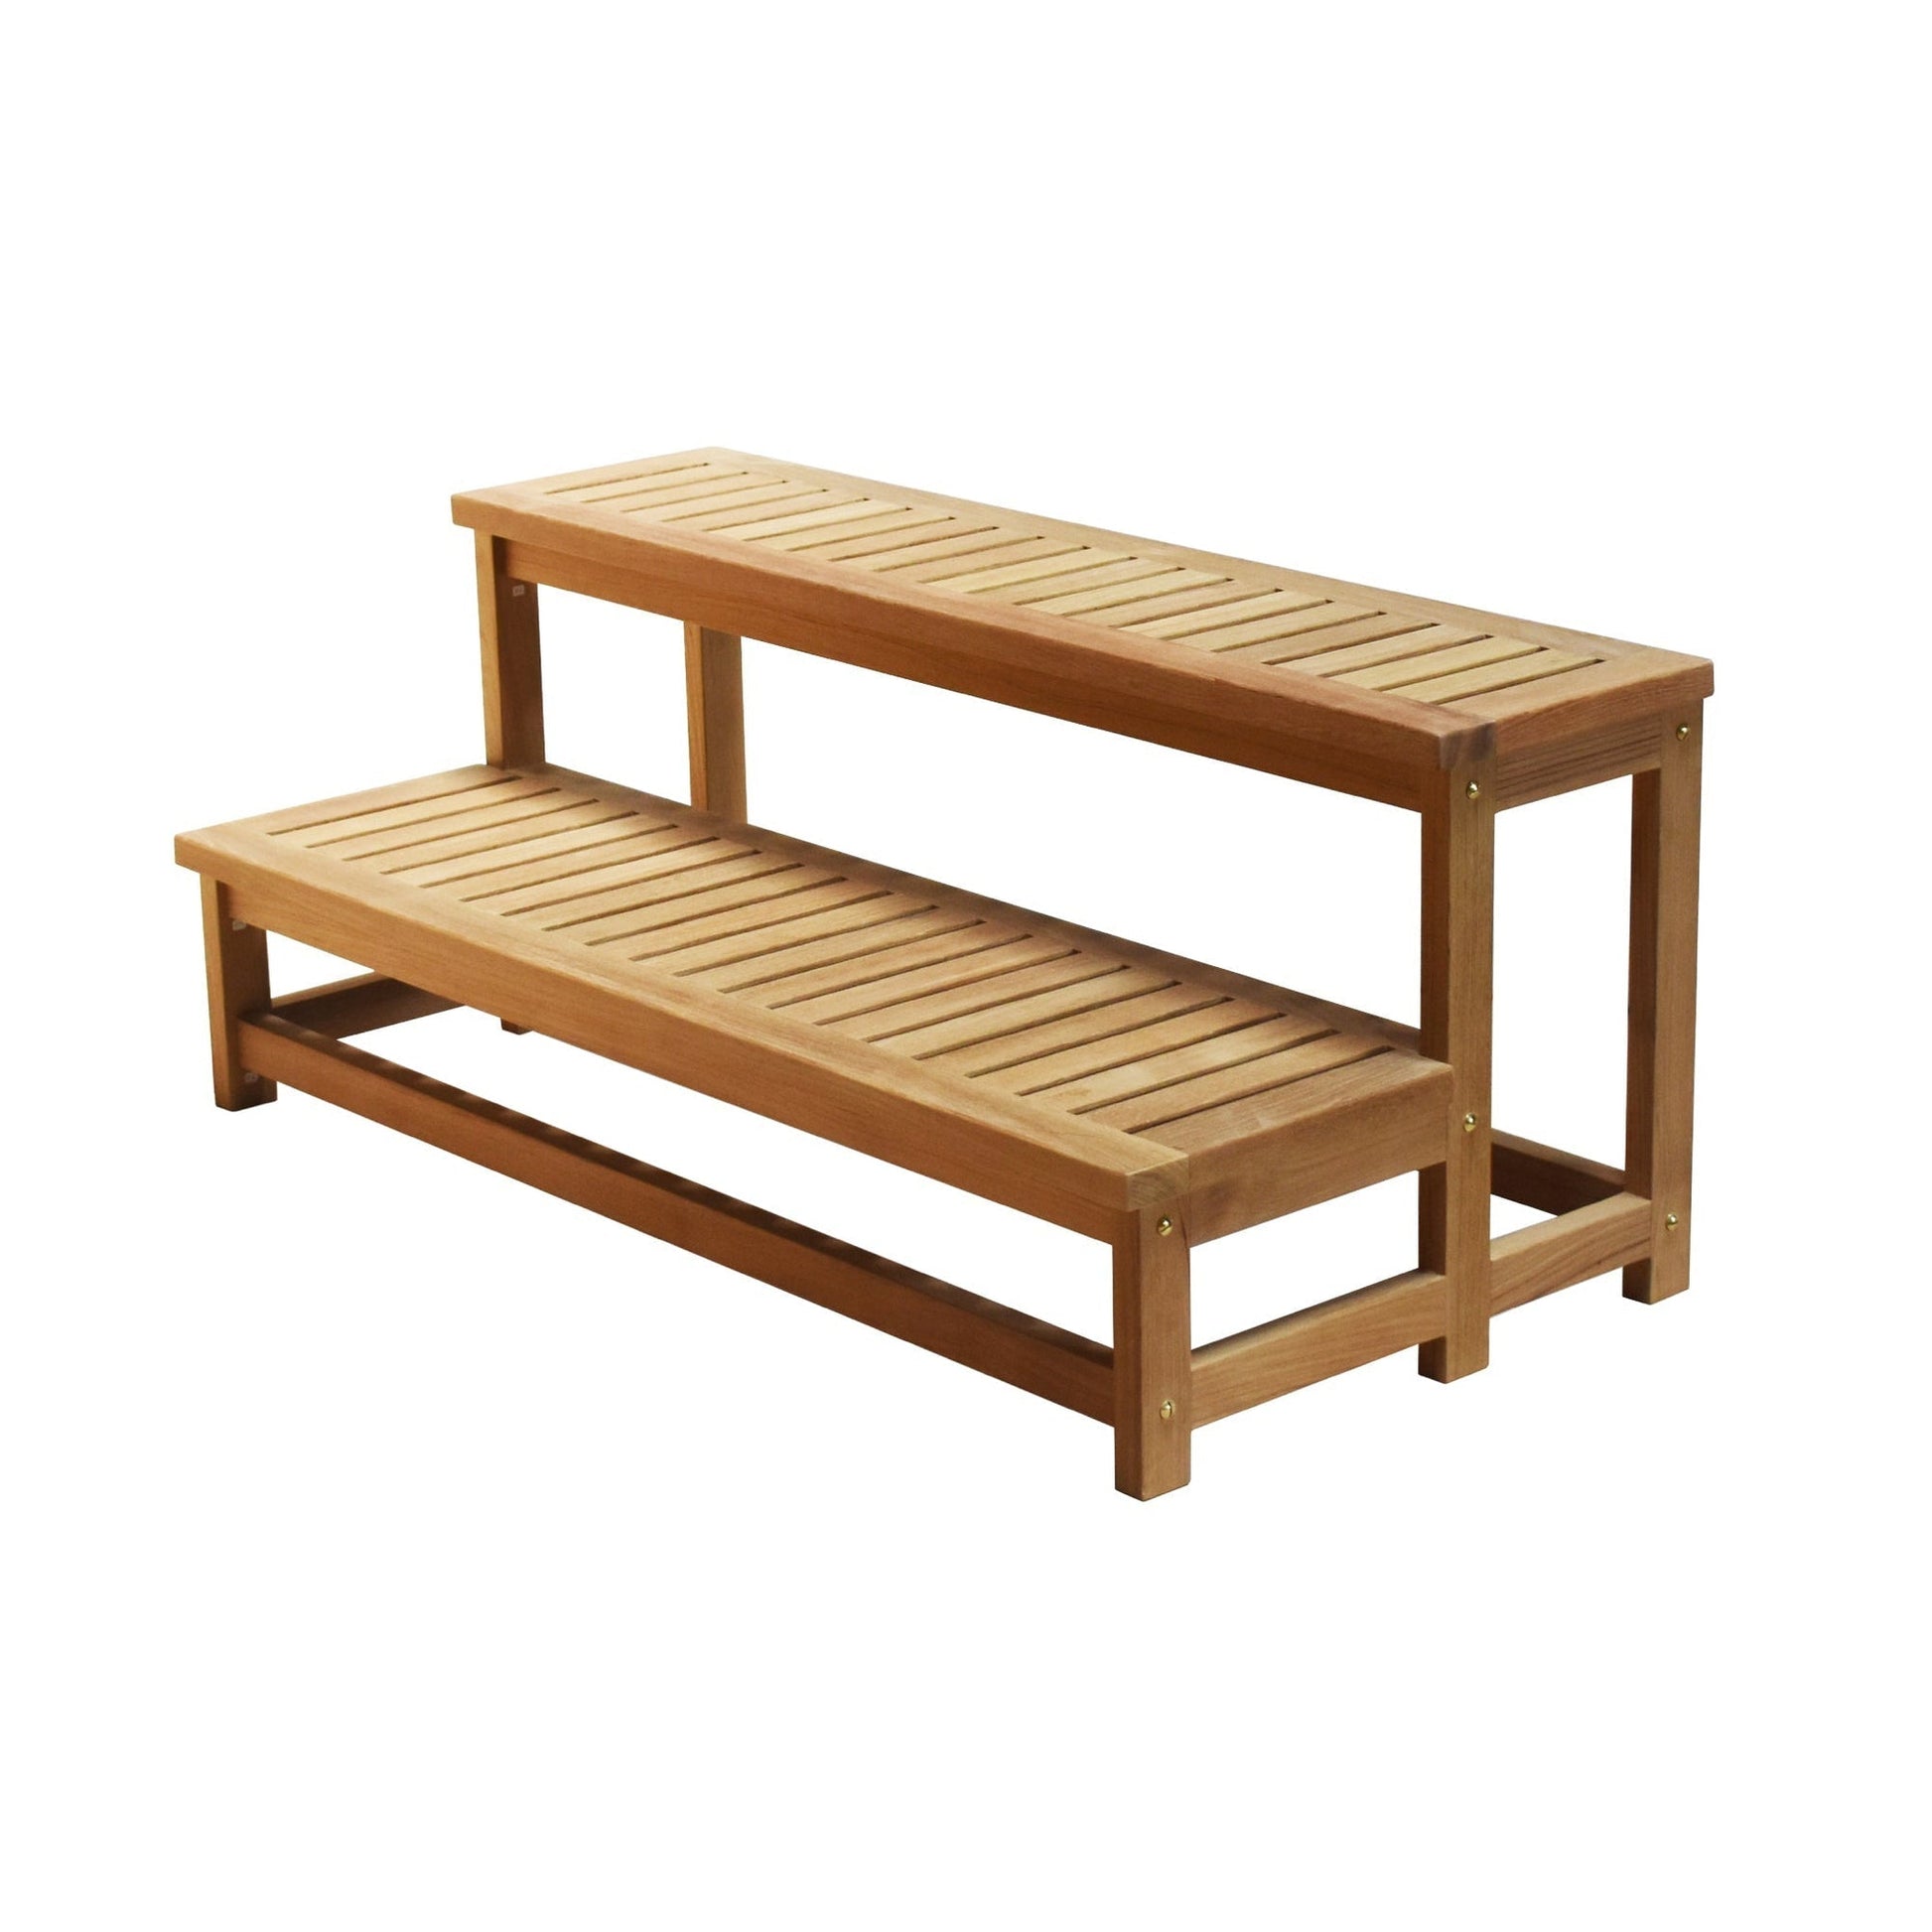 Can Teak Wood Get Wet? Discover the Powerful Benefits of Owning Teak Furniture